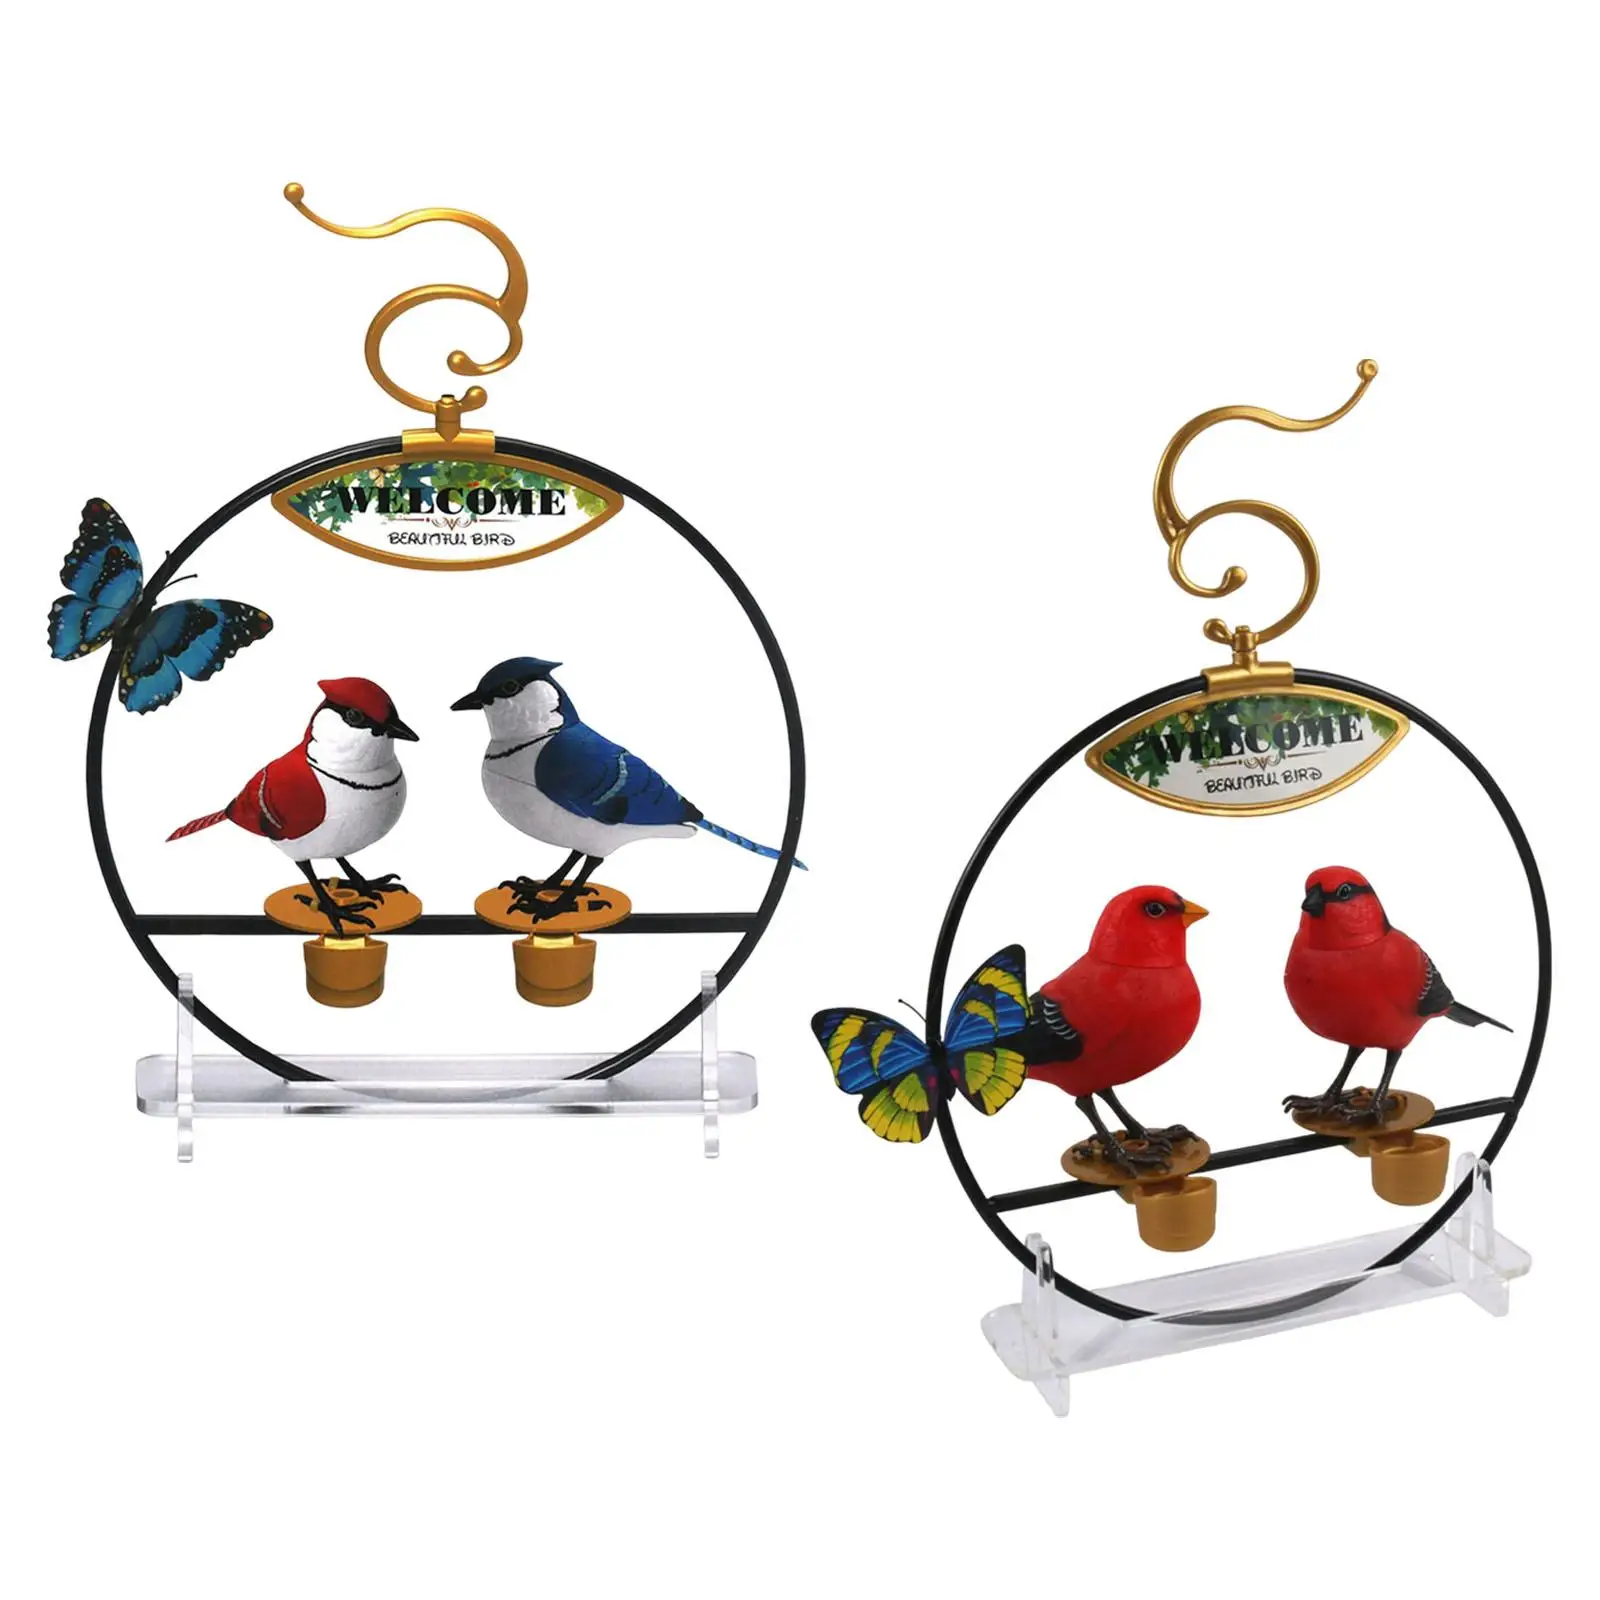 Adorable Singing Chirping Dancing Parrots Birds with Sound Sensor Chirping Dancing Parrots Bird Kids Toy Gift Home Decoration